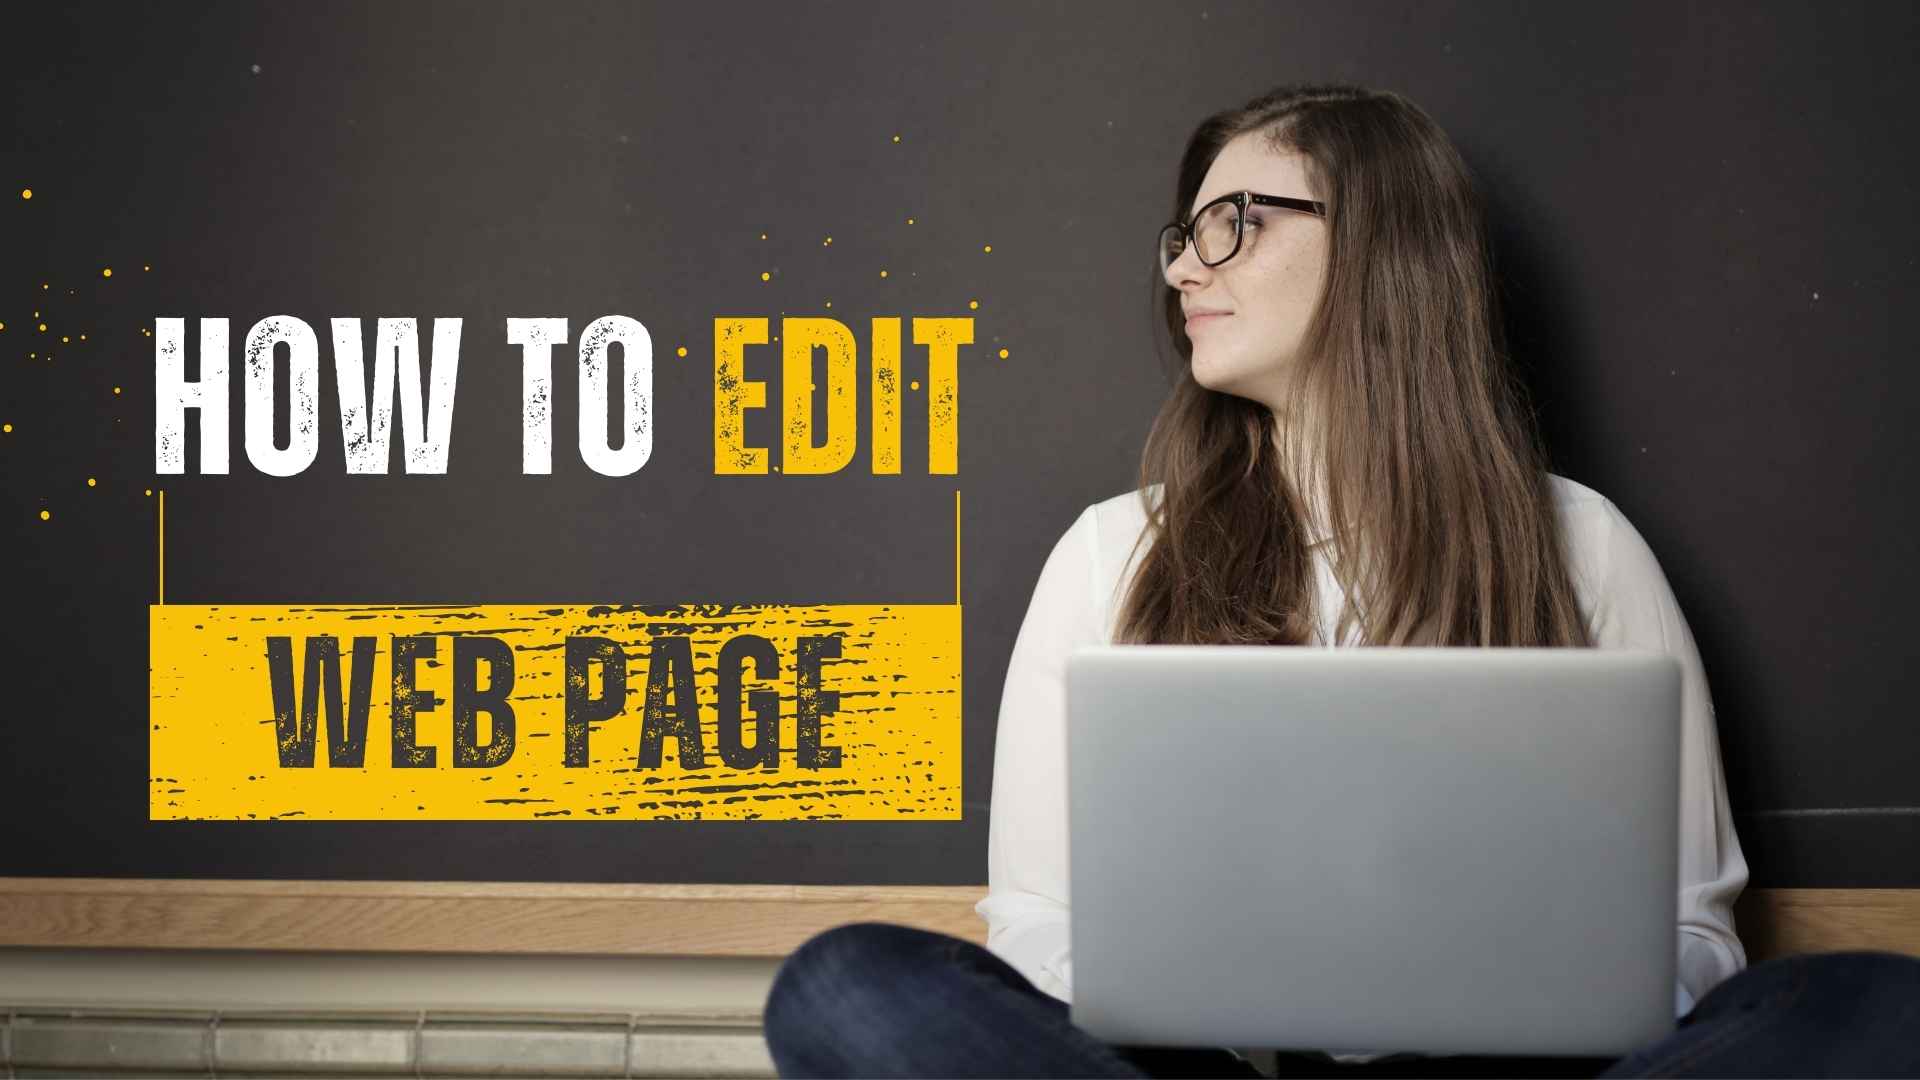 how to edit webpage